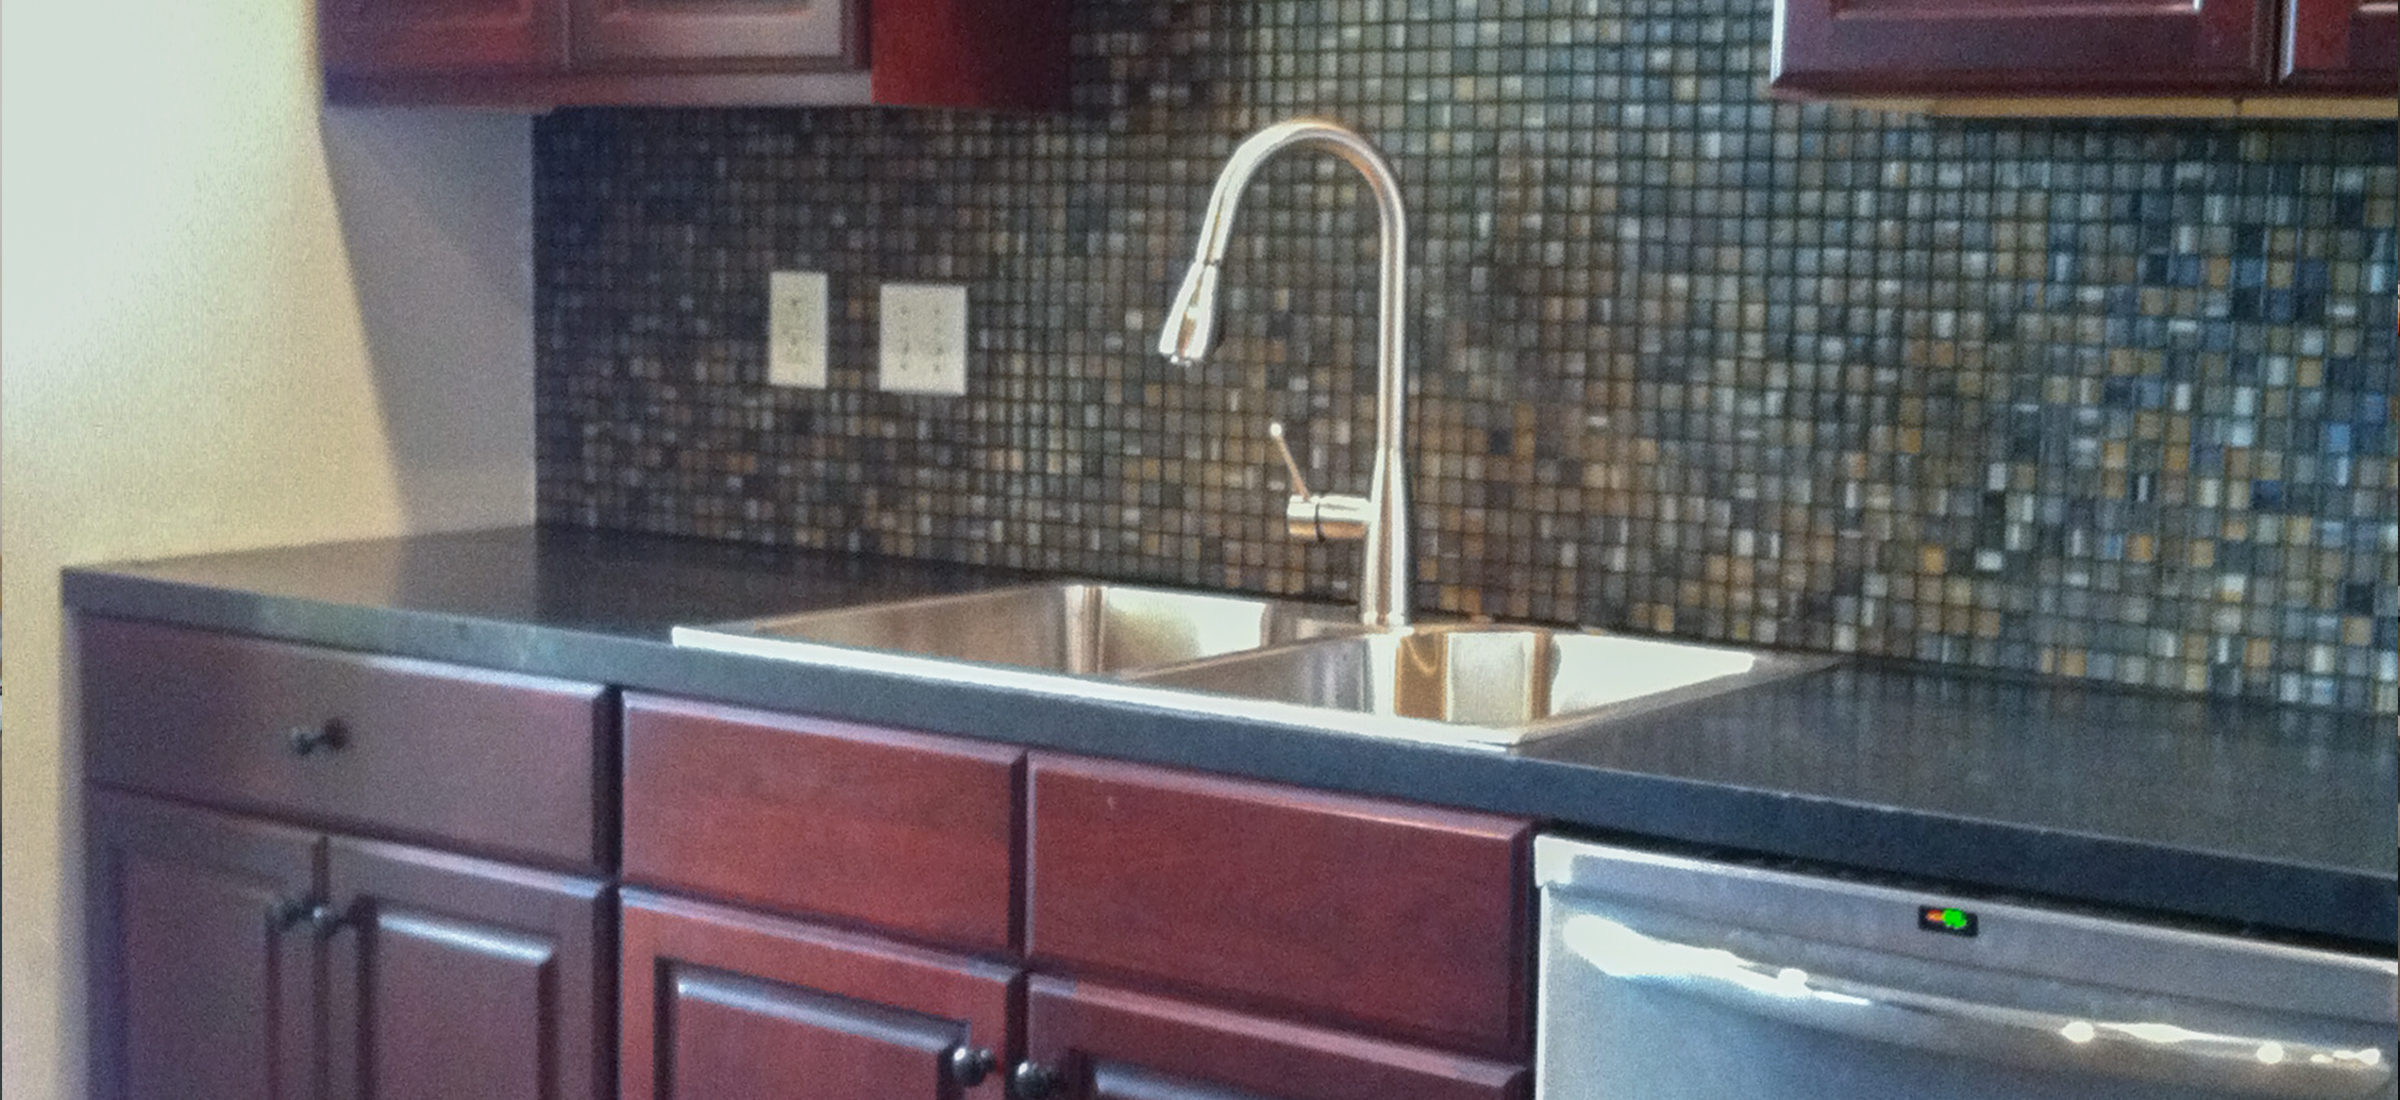 The Lofts On Belmont suite-100 sink remodel in 2012